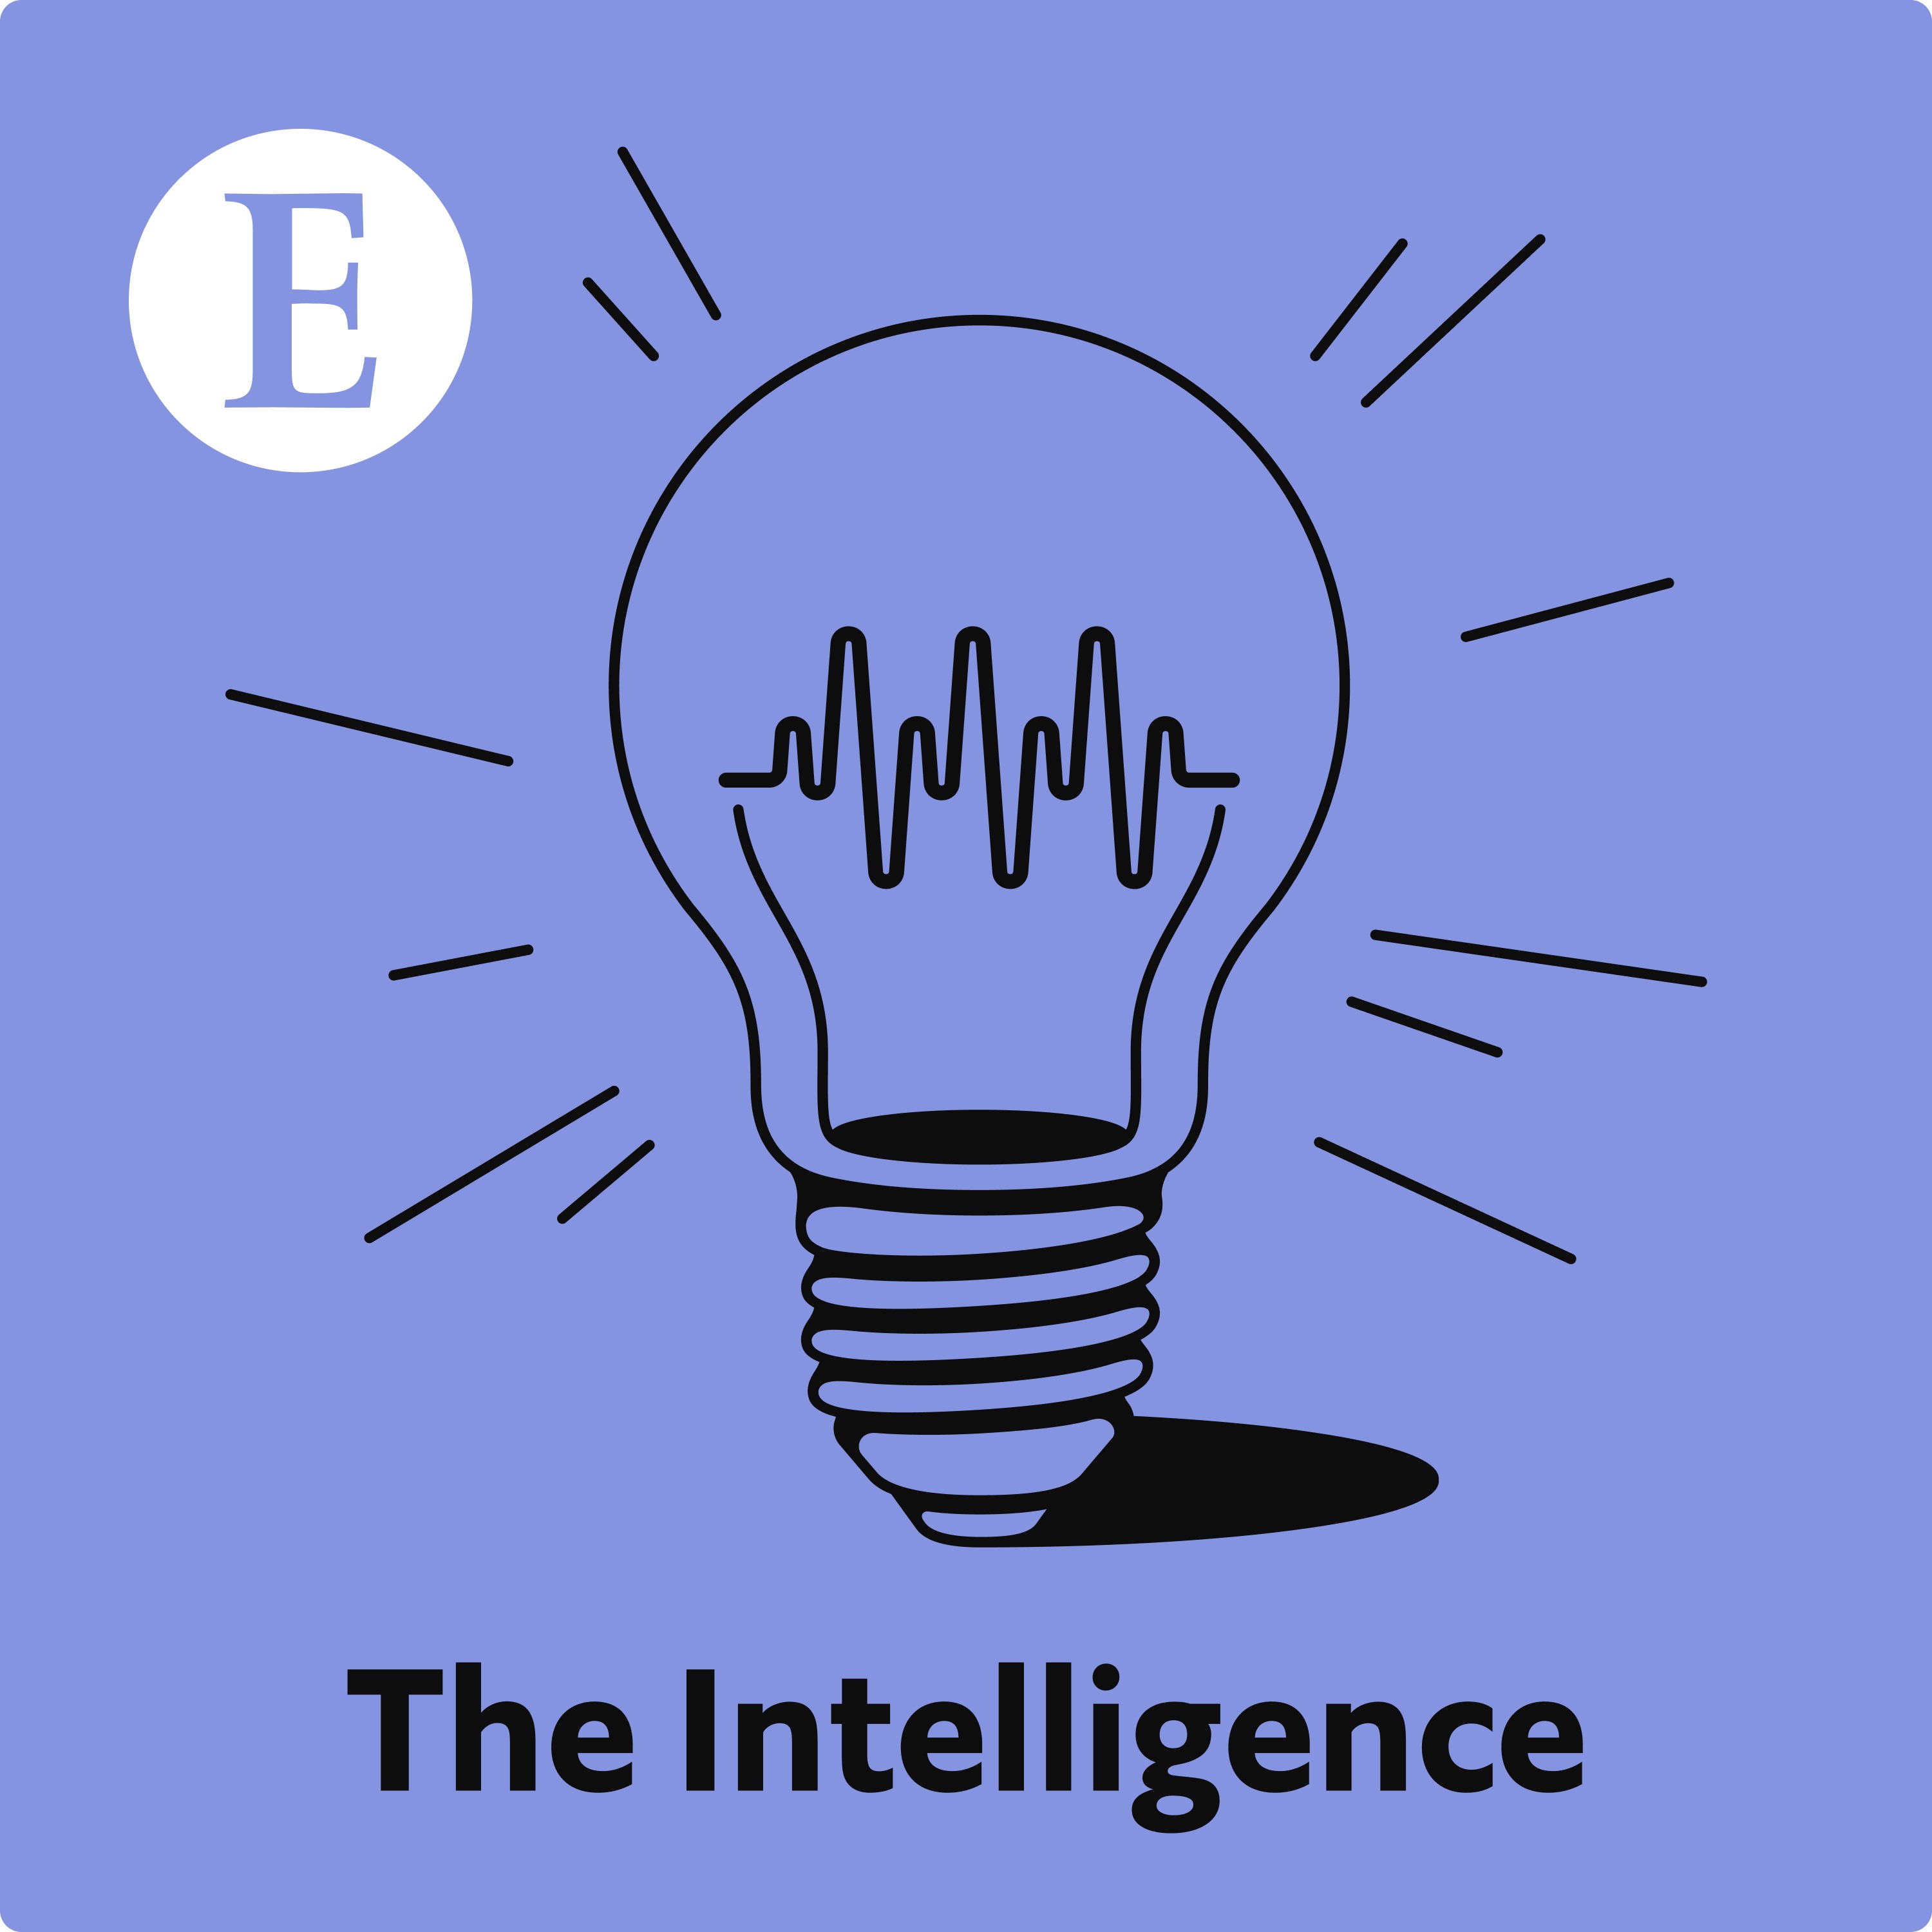 The Intelligence from The Economist podcast